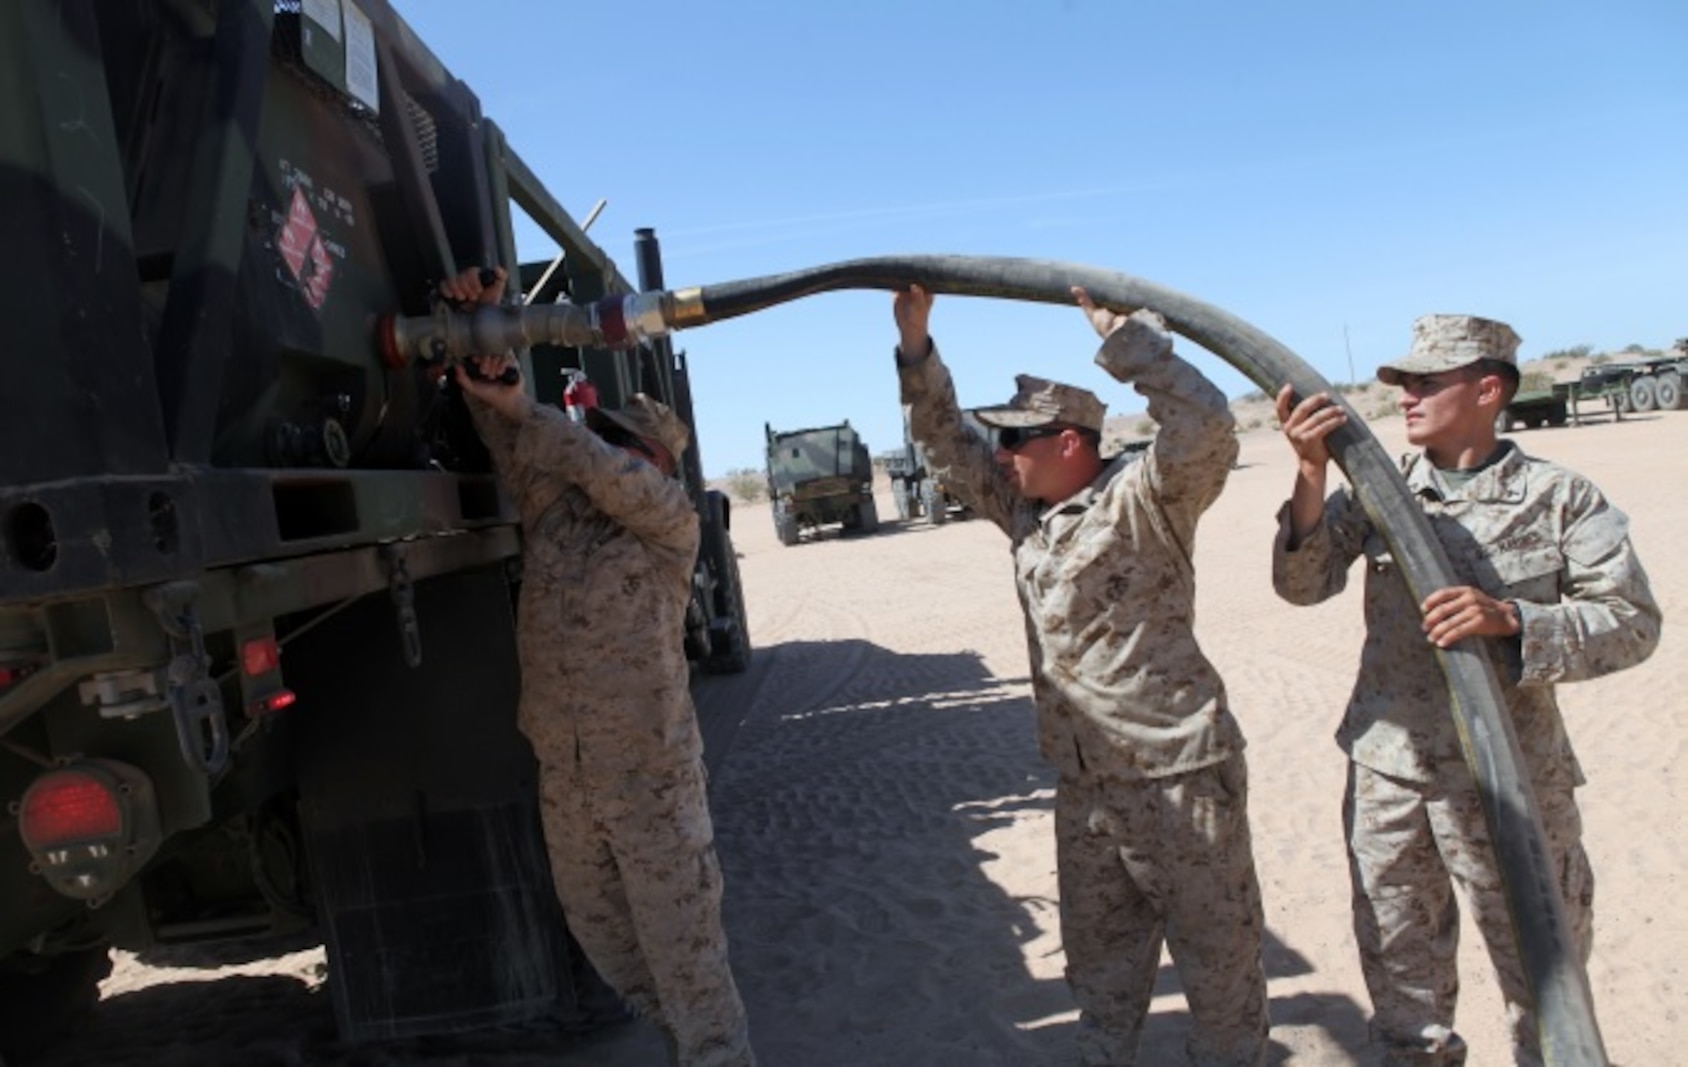 Private First Class Brenen Tischner, left, a Motor Transportation Operator, with 1st Transport Support Battalion, Combat Logistics Regiment 1, 1st Marine Logistics Group, attaches a fuel hose to an AMK-23 Medium Tactical Vehicle Replacement with the help of two other Marines during routine refueling maintenance on the outskirts of Marine Corps Air Station Yuma, Ariz., April 10, 2015.